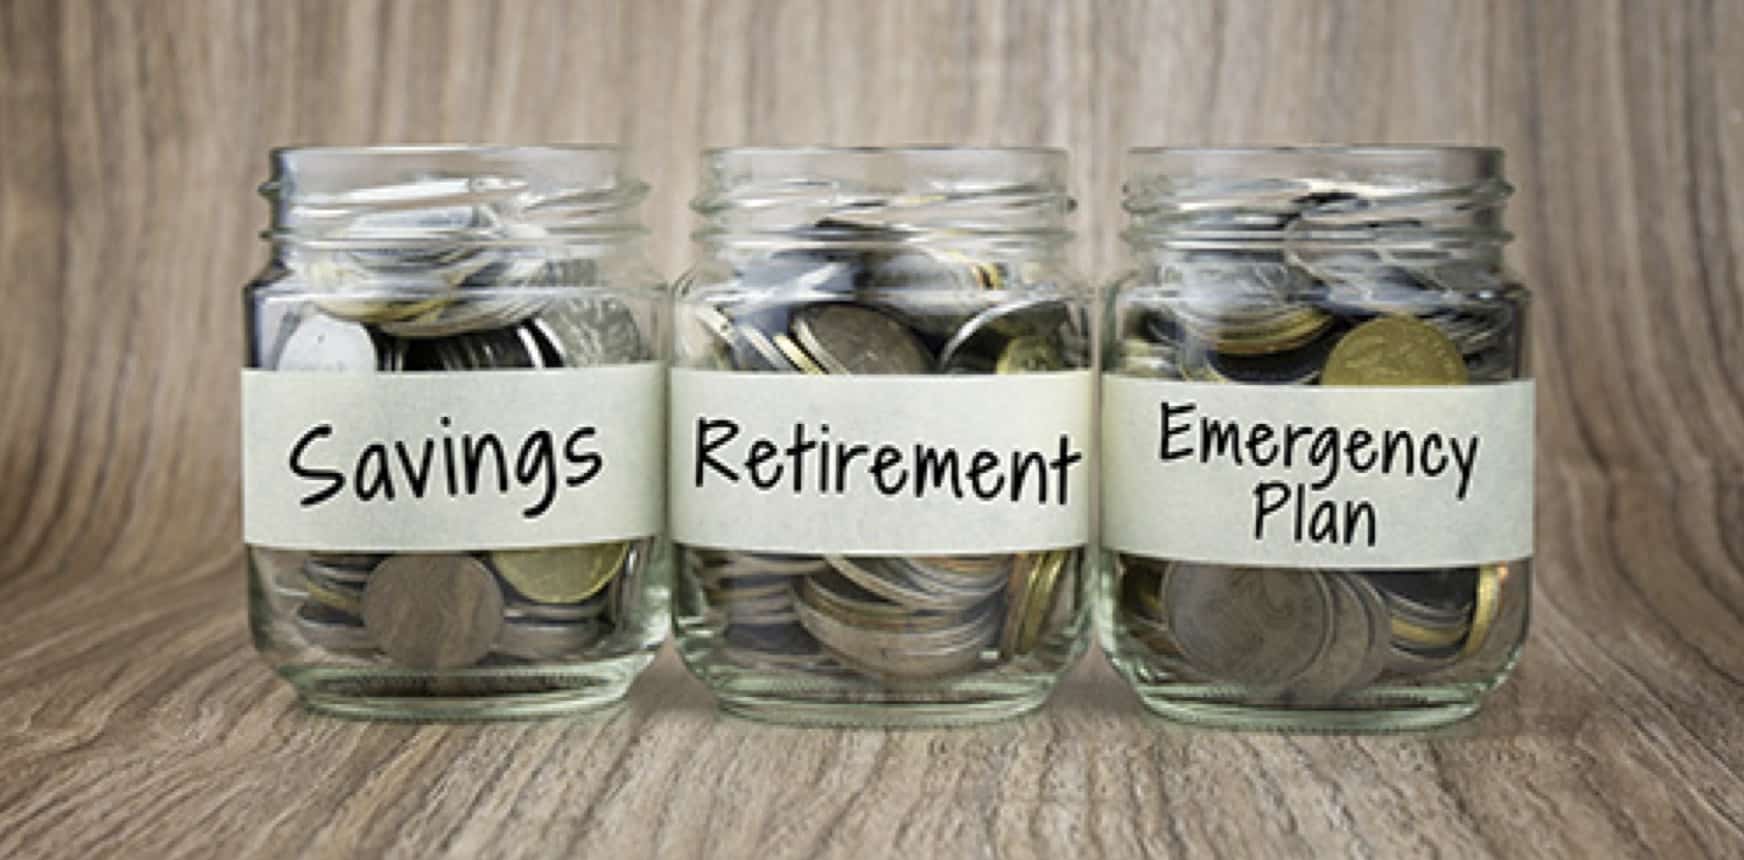 three jars of coins labels savings, retirement, emergency plan, for budgeting